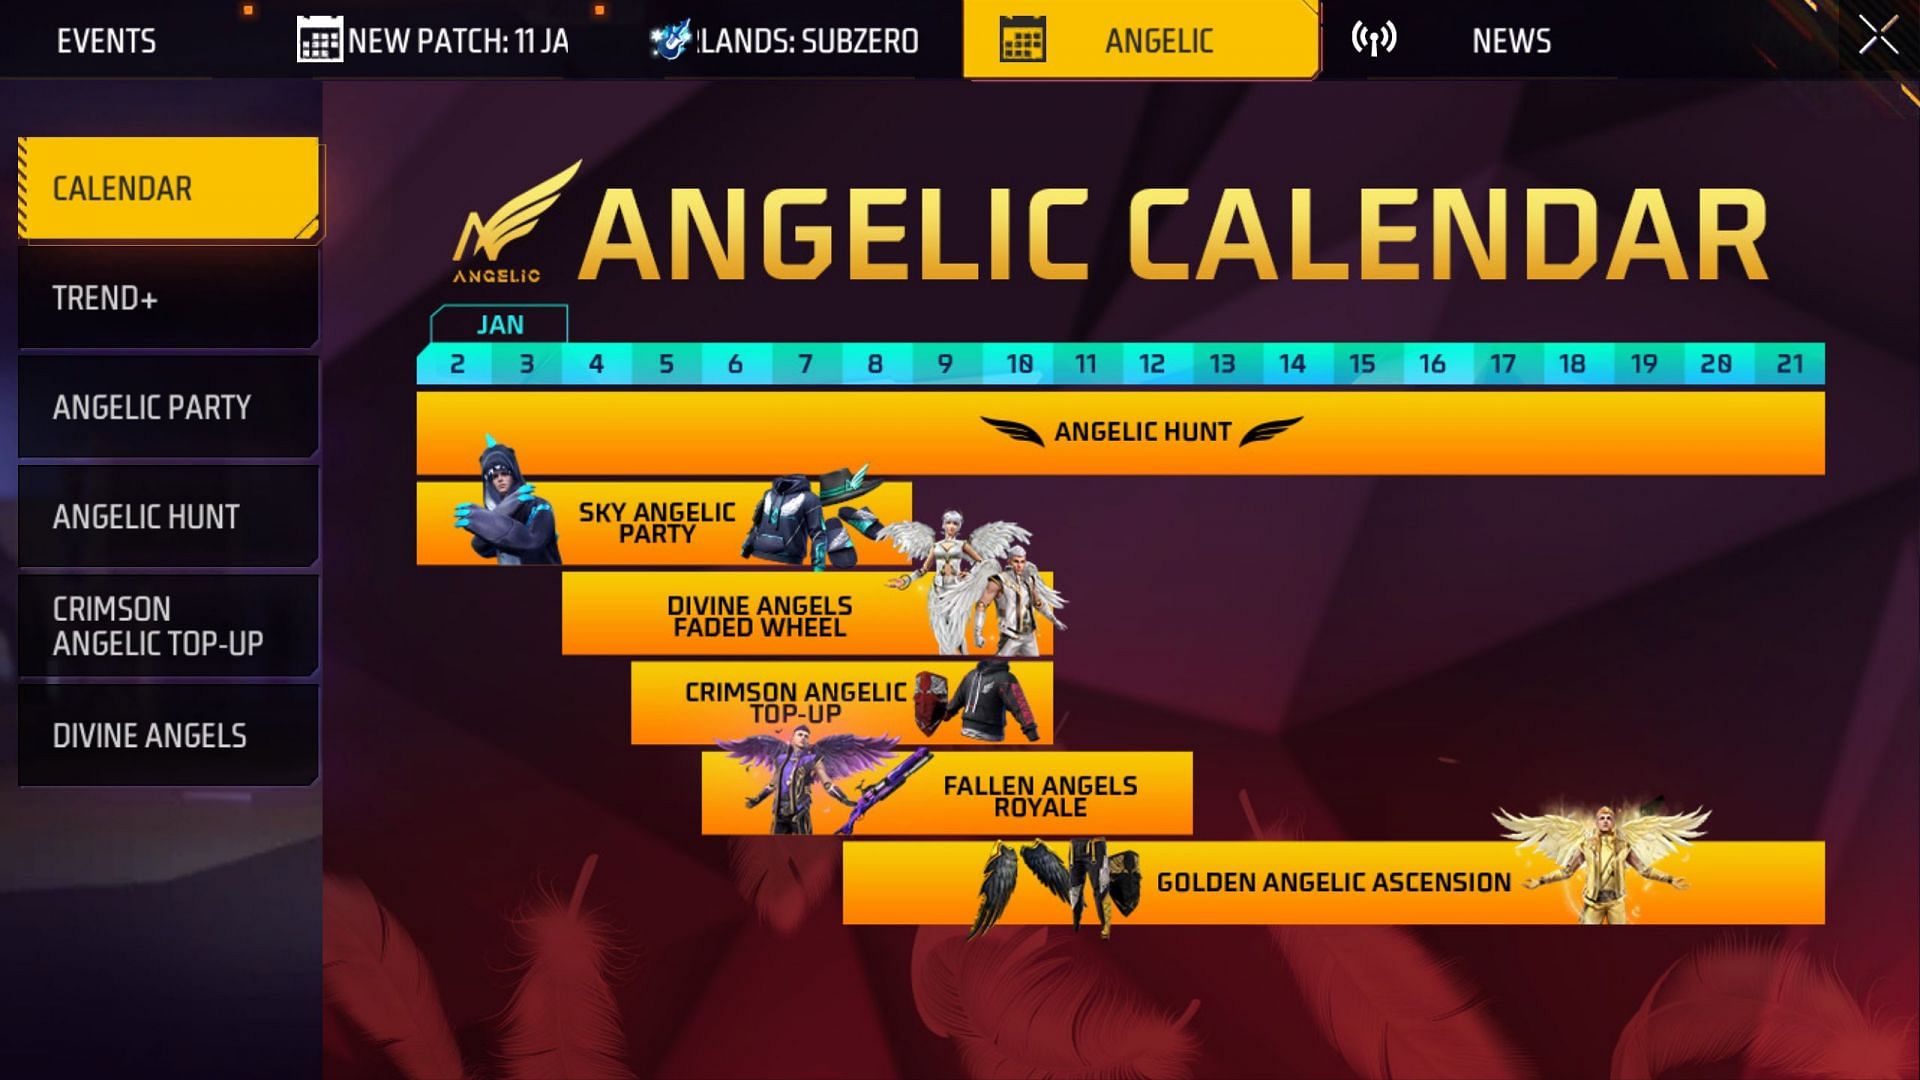 You must select the Crimson Angelic Top-Up from the menu (Image via Garena)